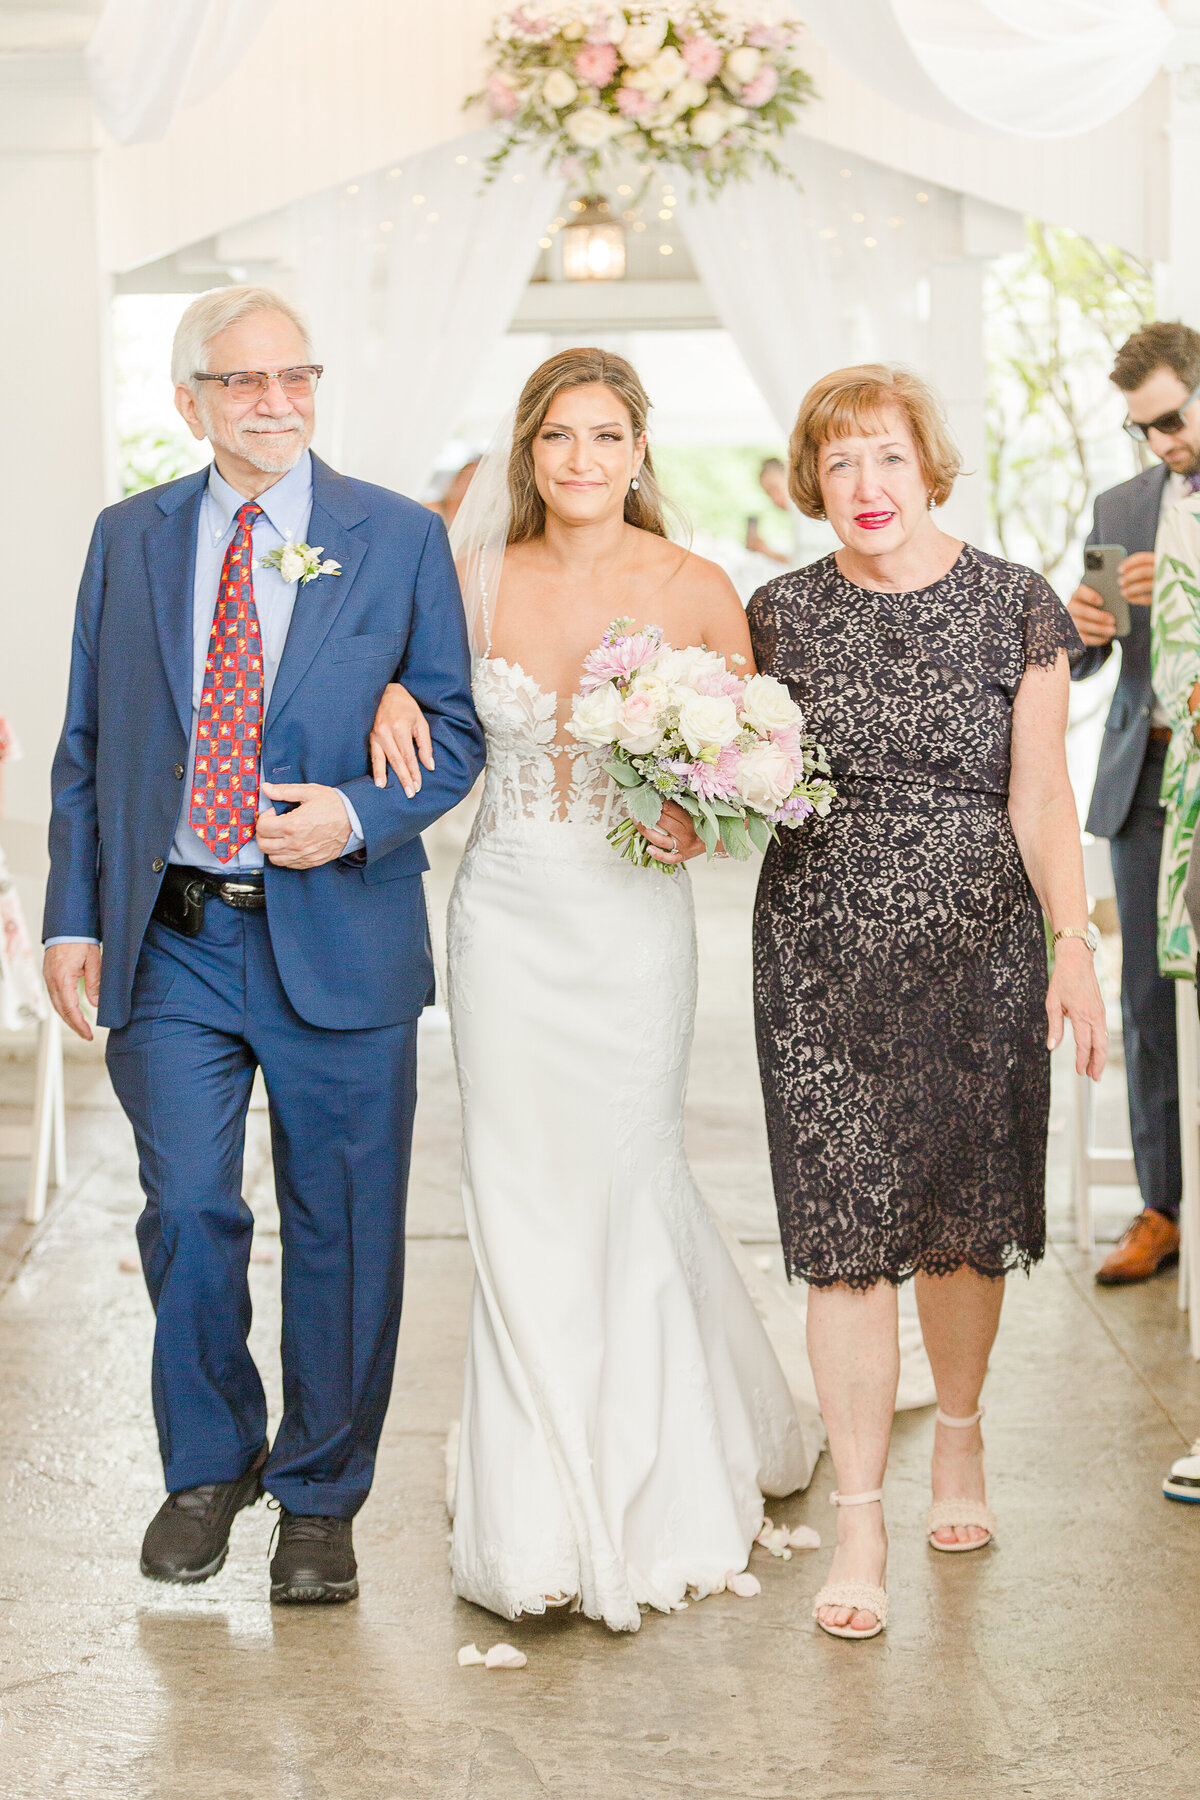 Bride's parents walk her down the aisle at the at the Five Bridge Inn. Captured by best Massachusetts wedding photographer Lia Rose Weddings.